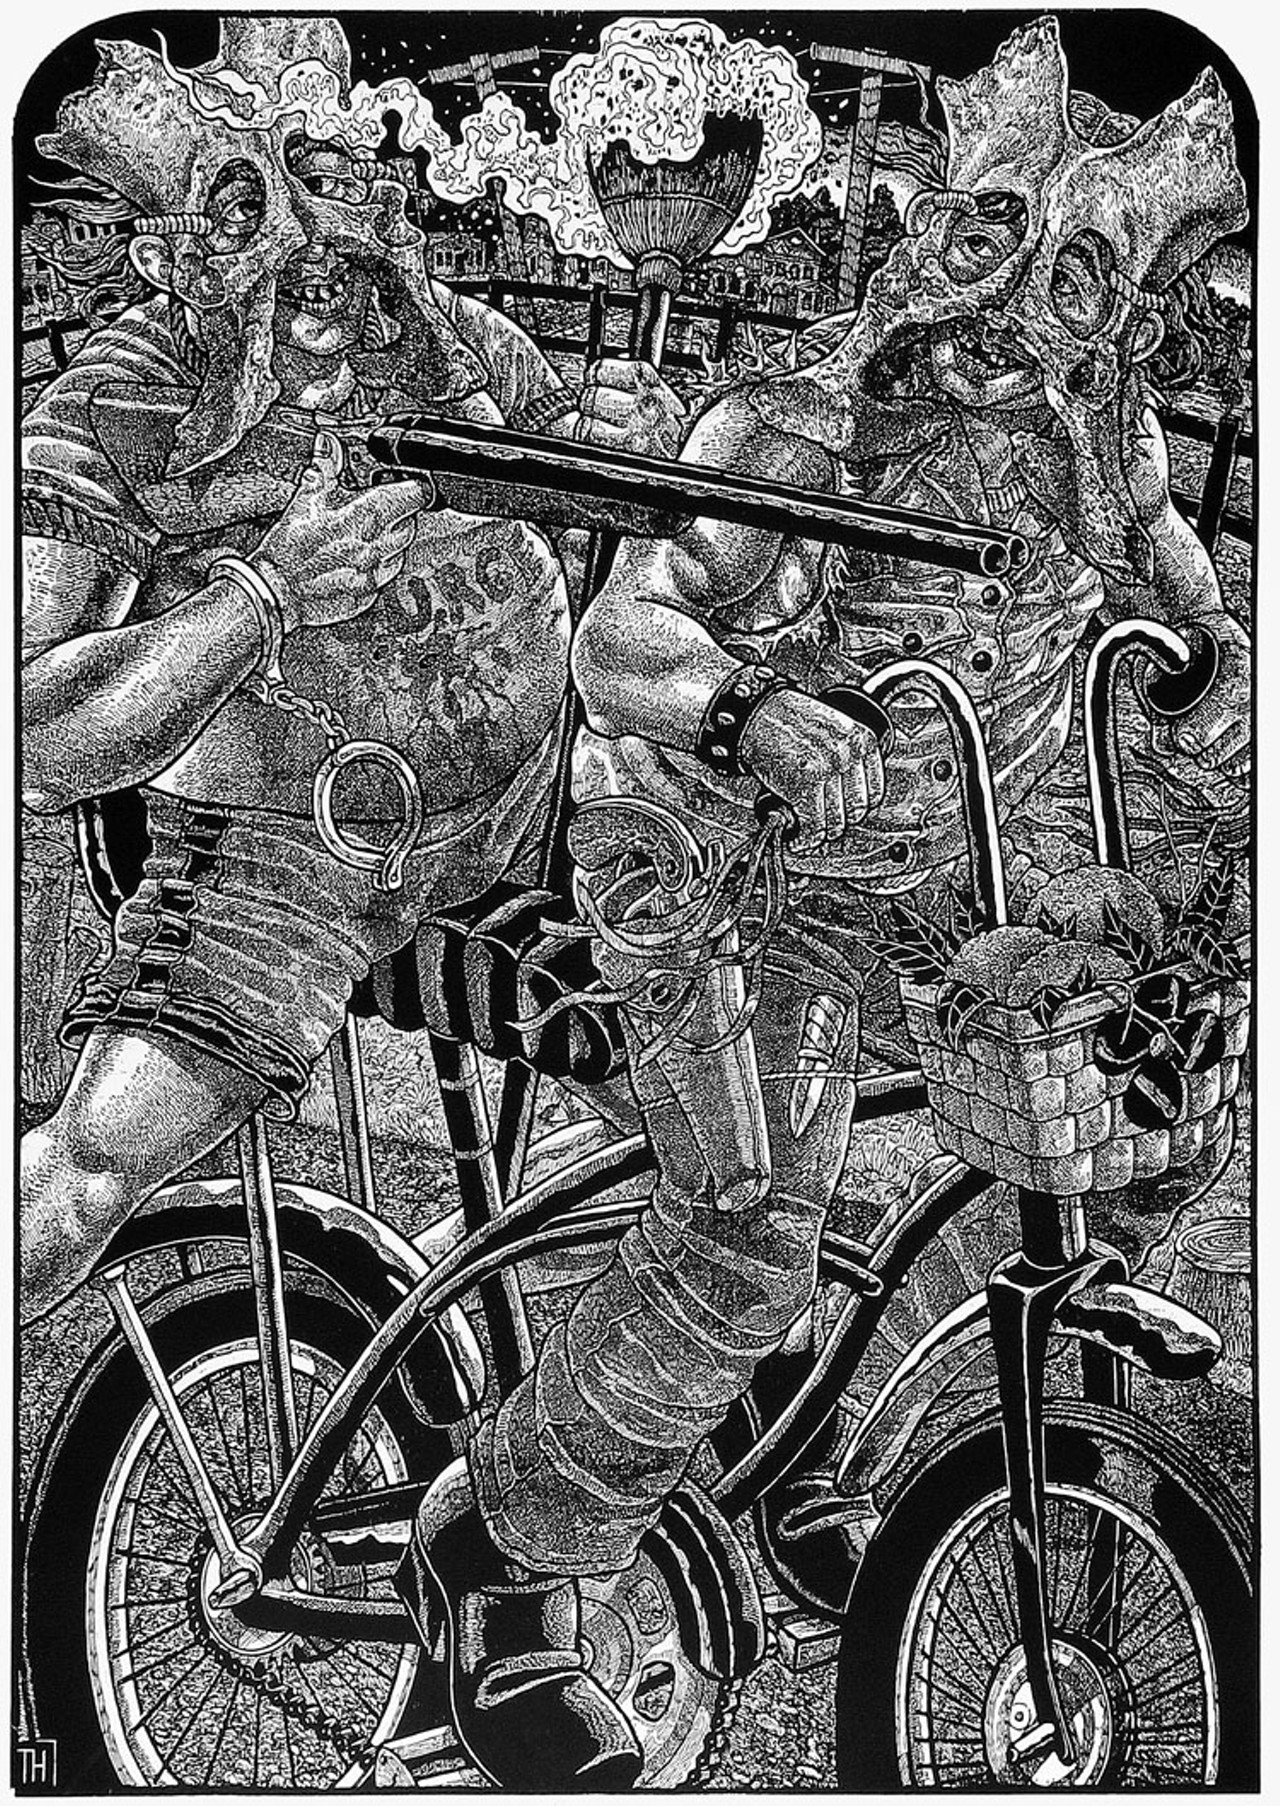 Tom Huck, "The Jolly Guano Brothers Ride Again" (woodcut, 38" x 52", 2004)